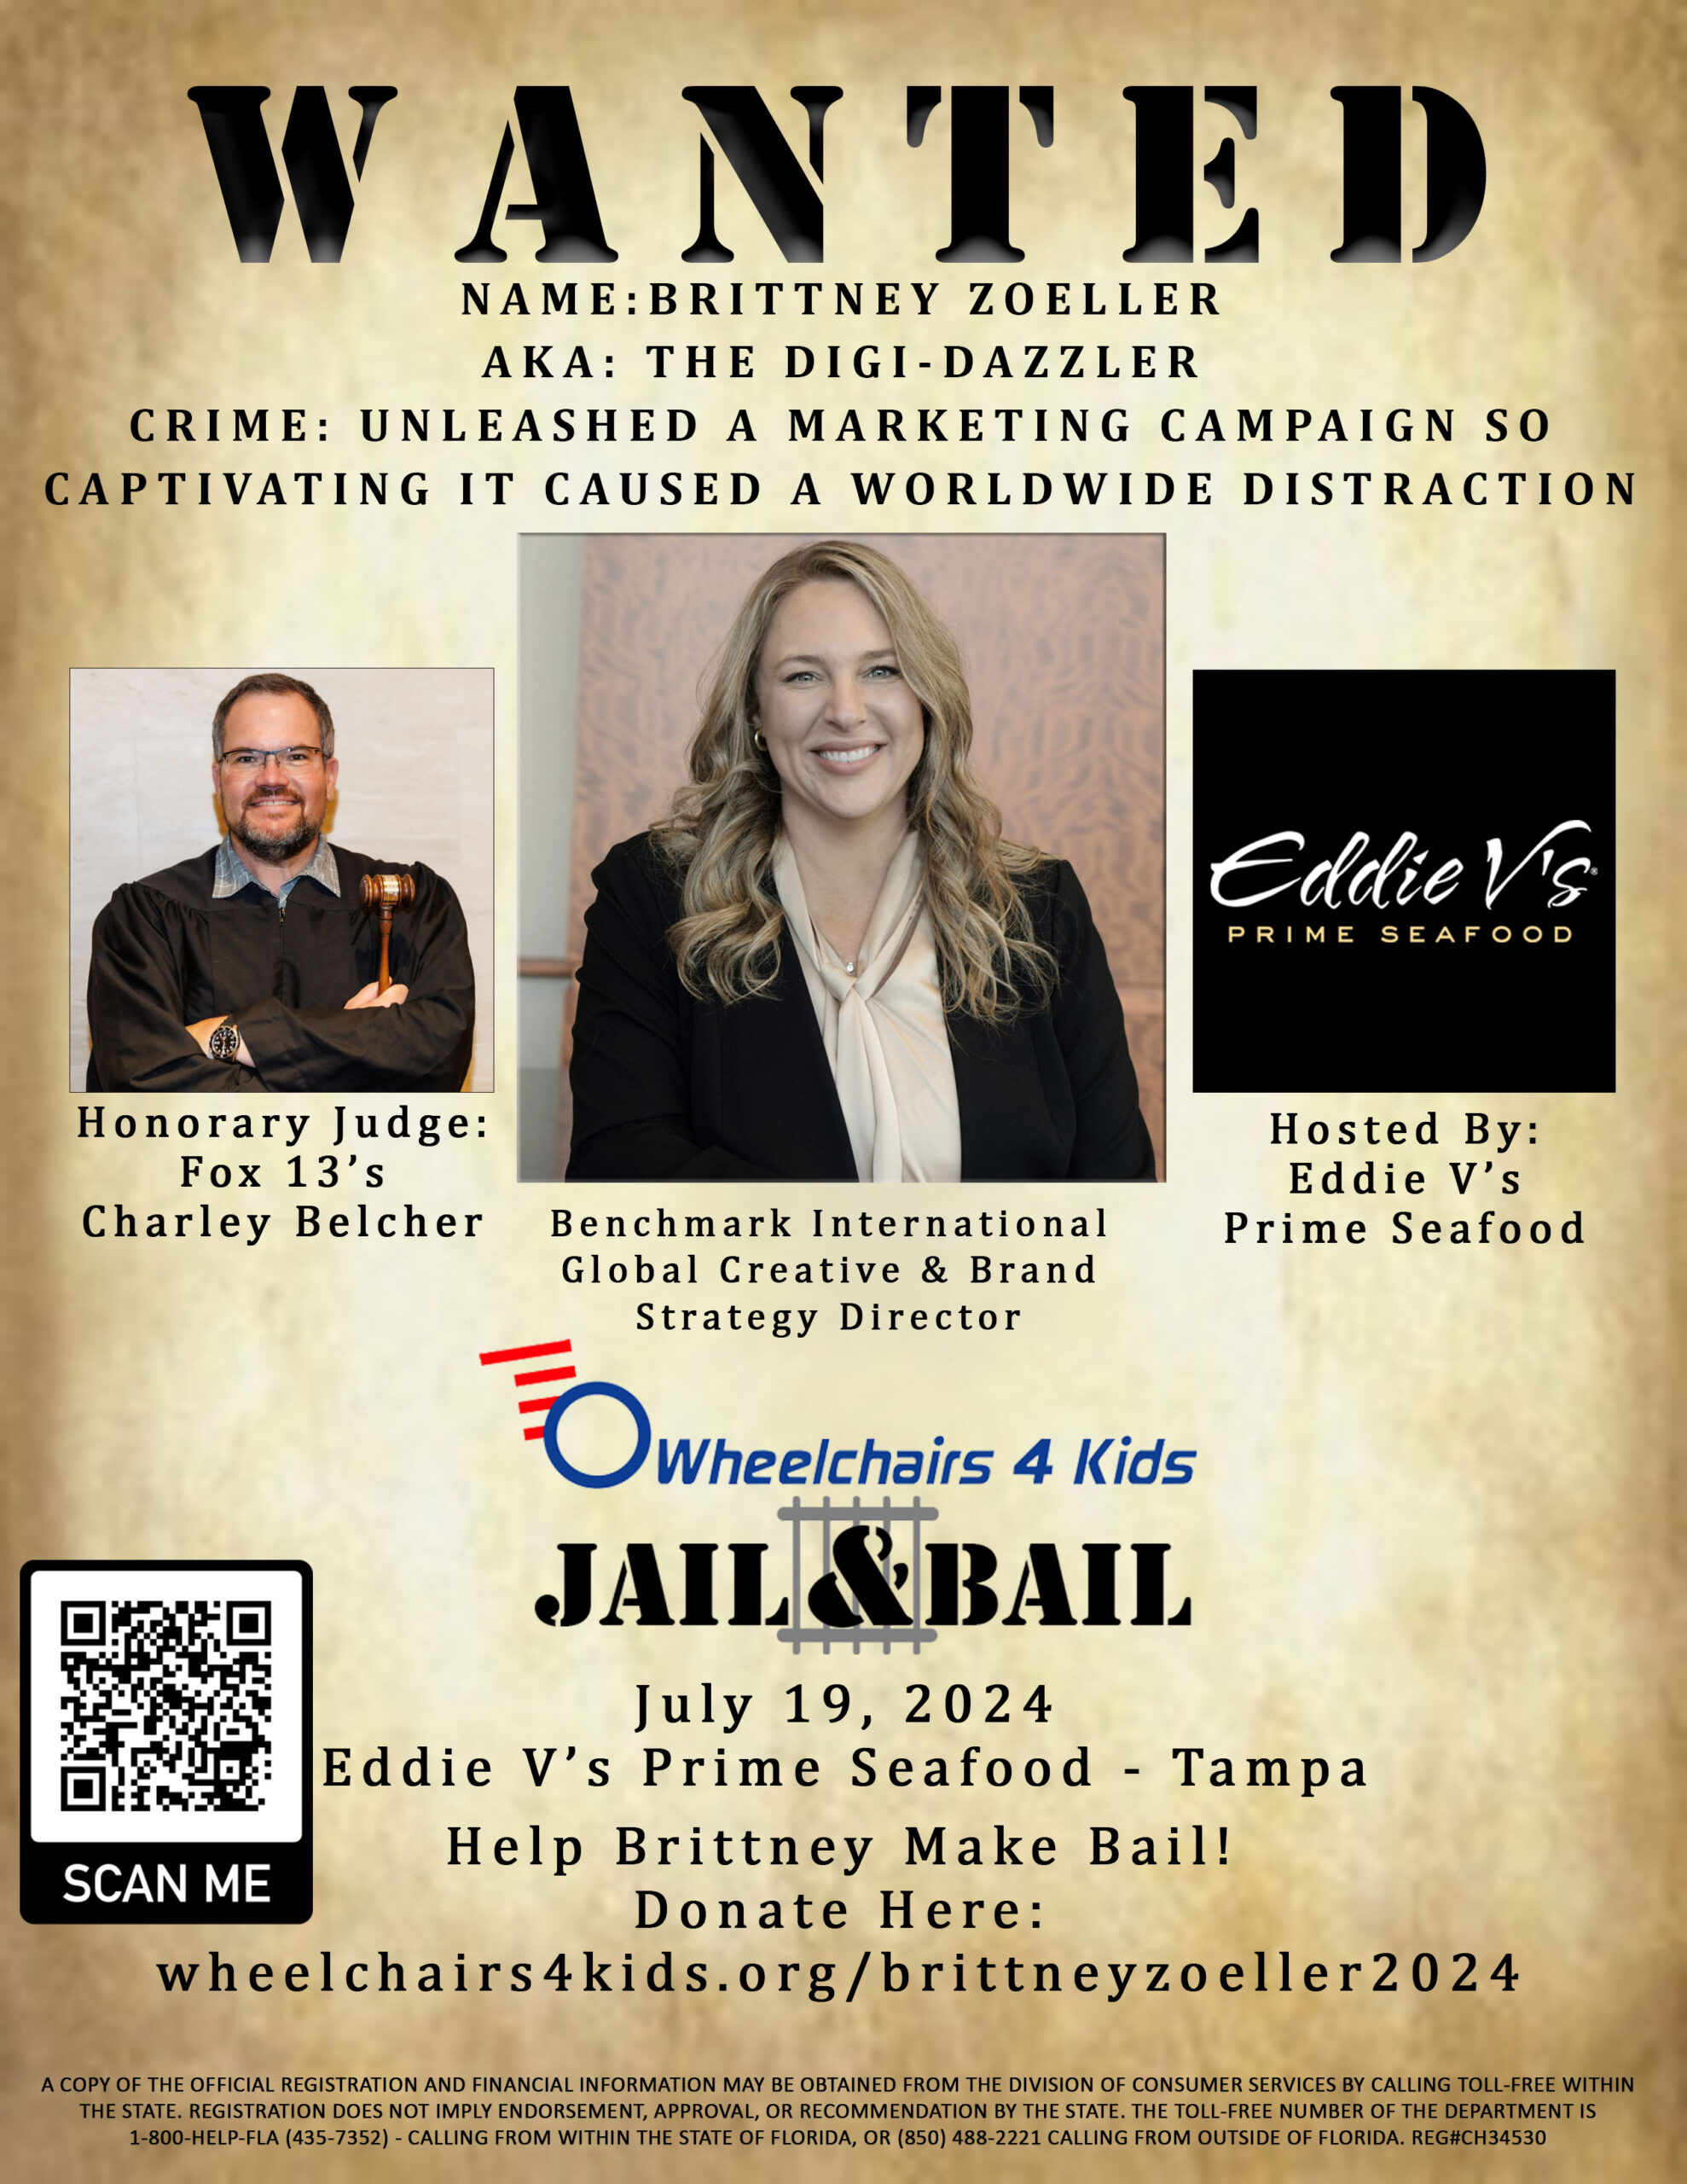 Brittney Zoeller 2024 campaign poster for Wheelchairs 4 Kids Jail & Bail Fundraiser